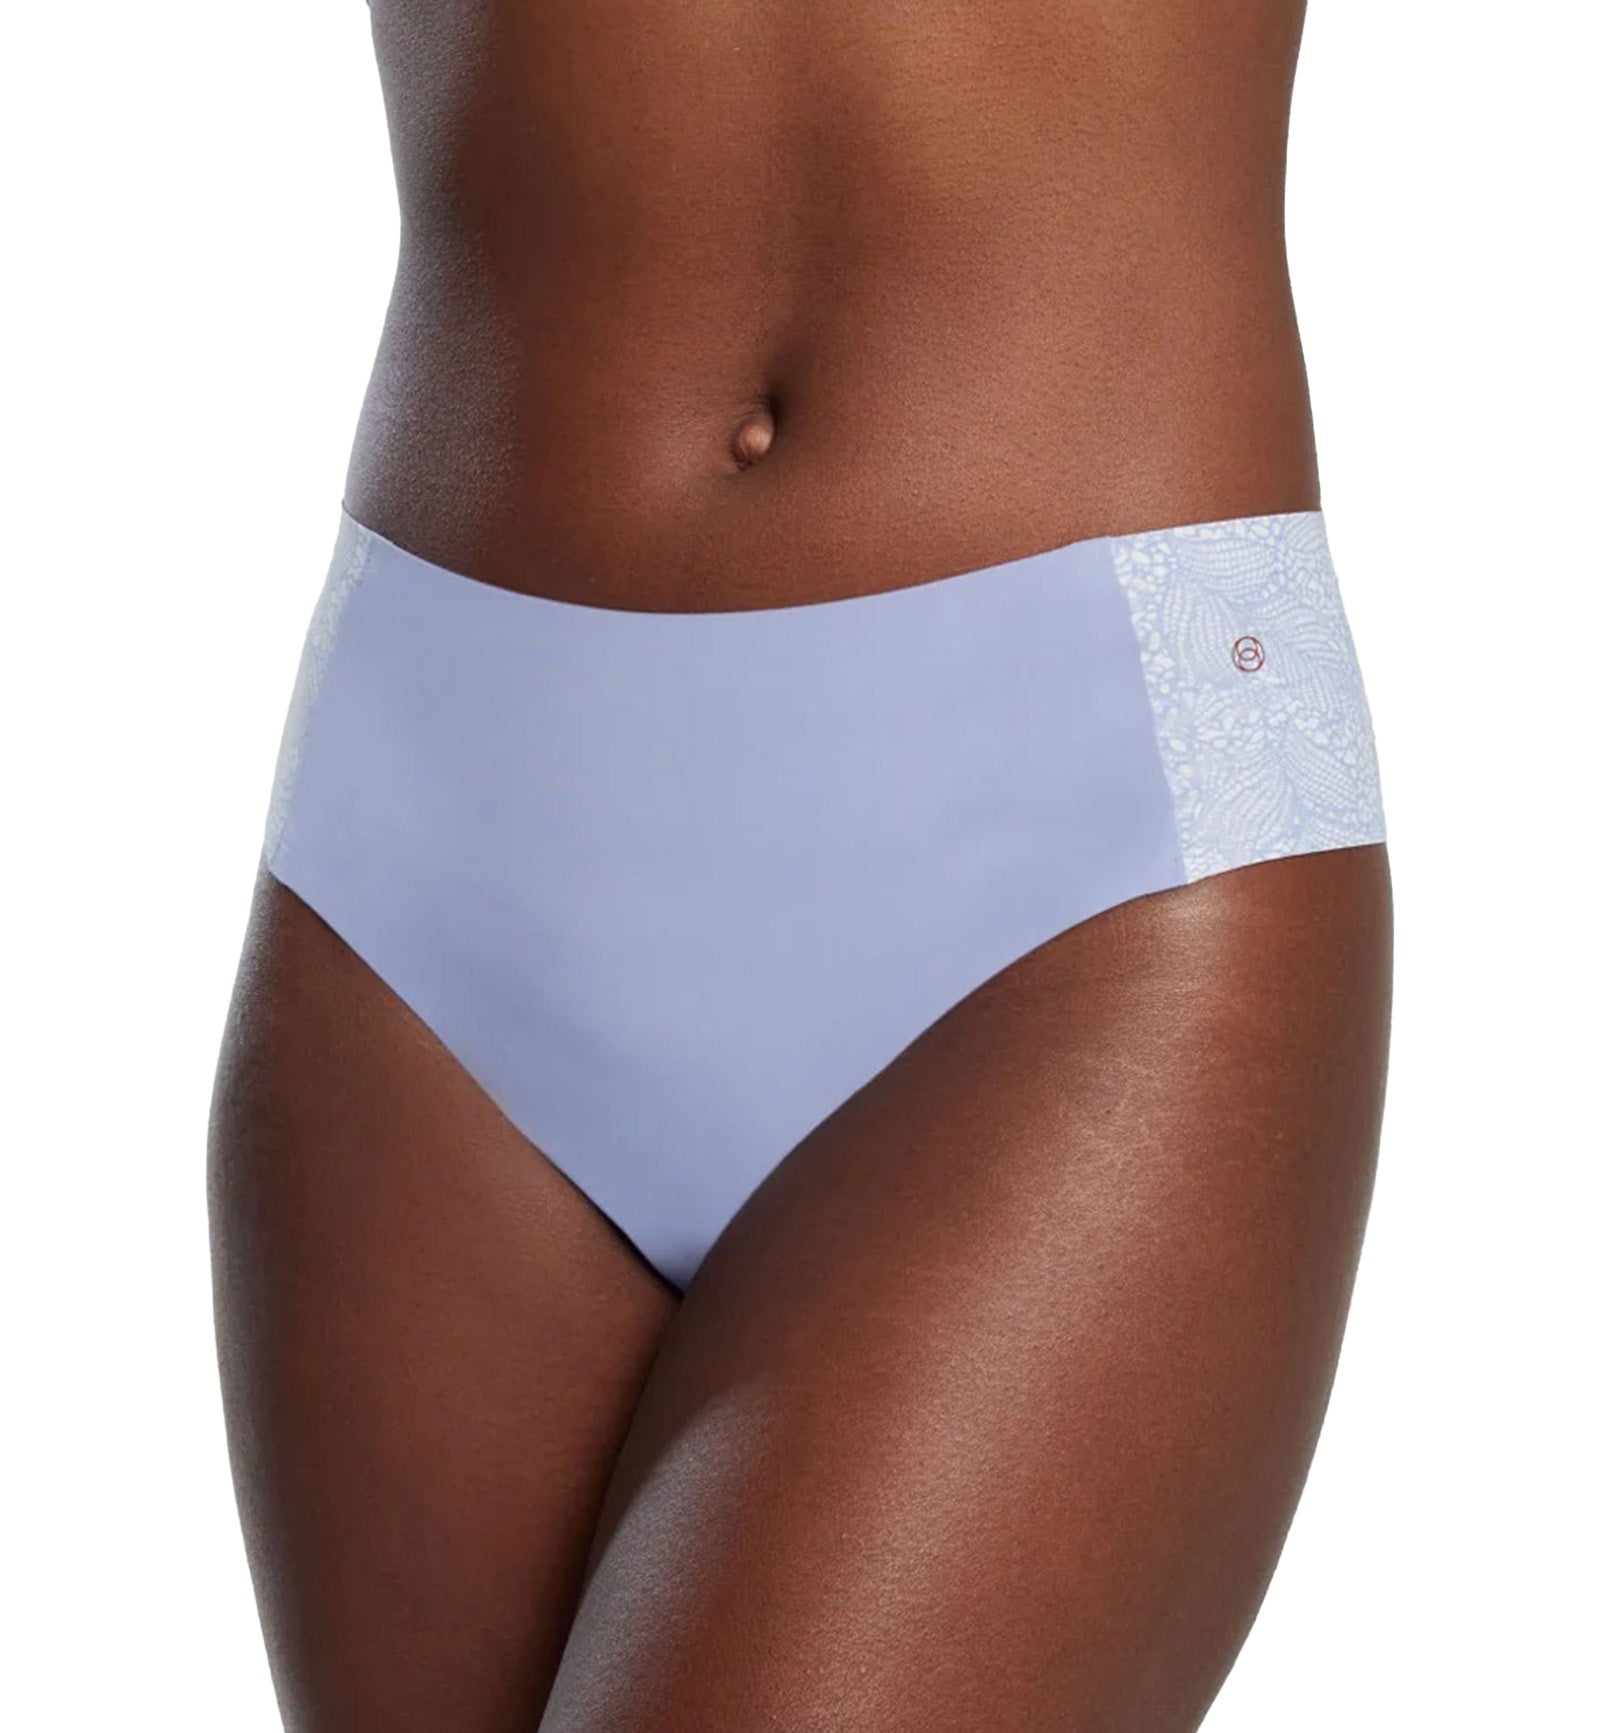 Evelyn & Bobbie High-Waisted Thong (1703),US 0-14,Moonstone Lace - Moonstone Lace,US 0-14